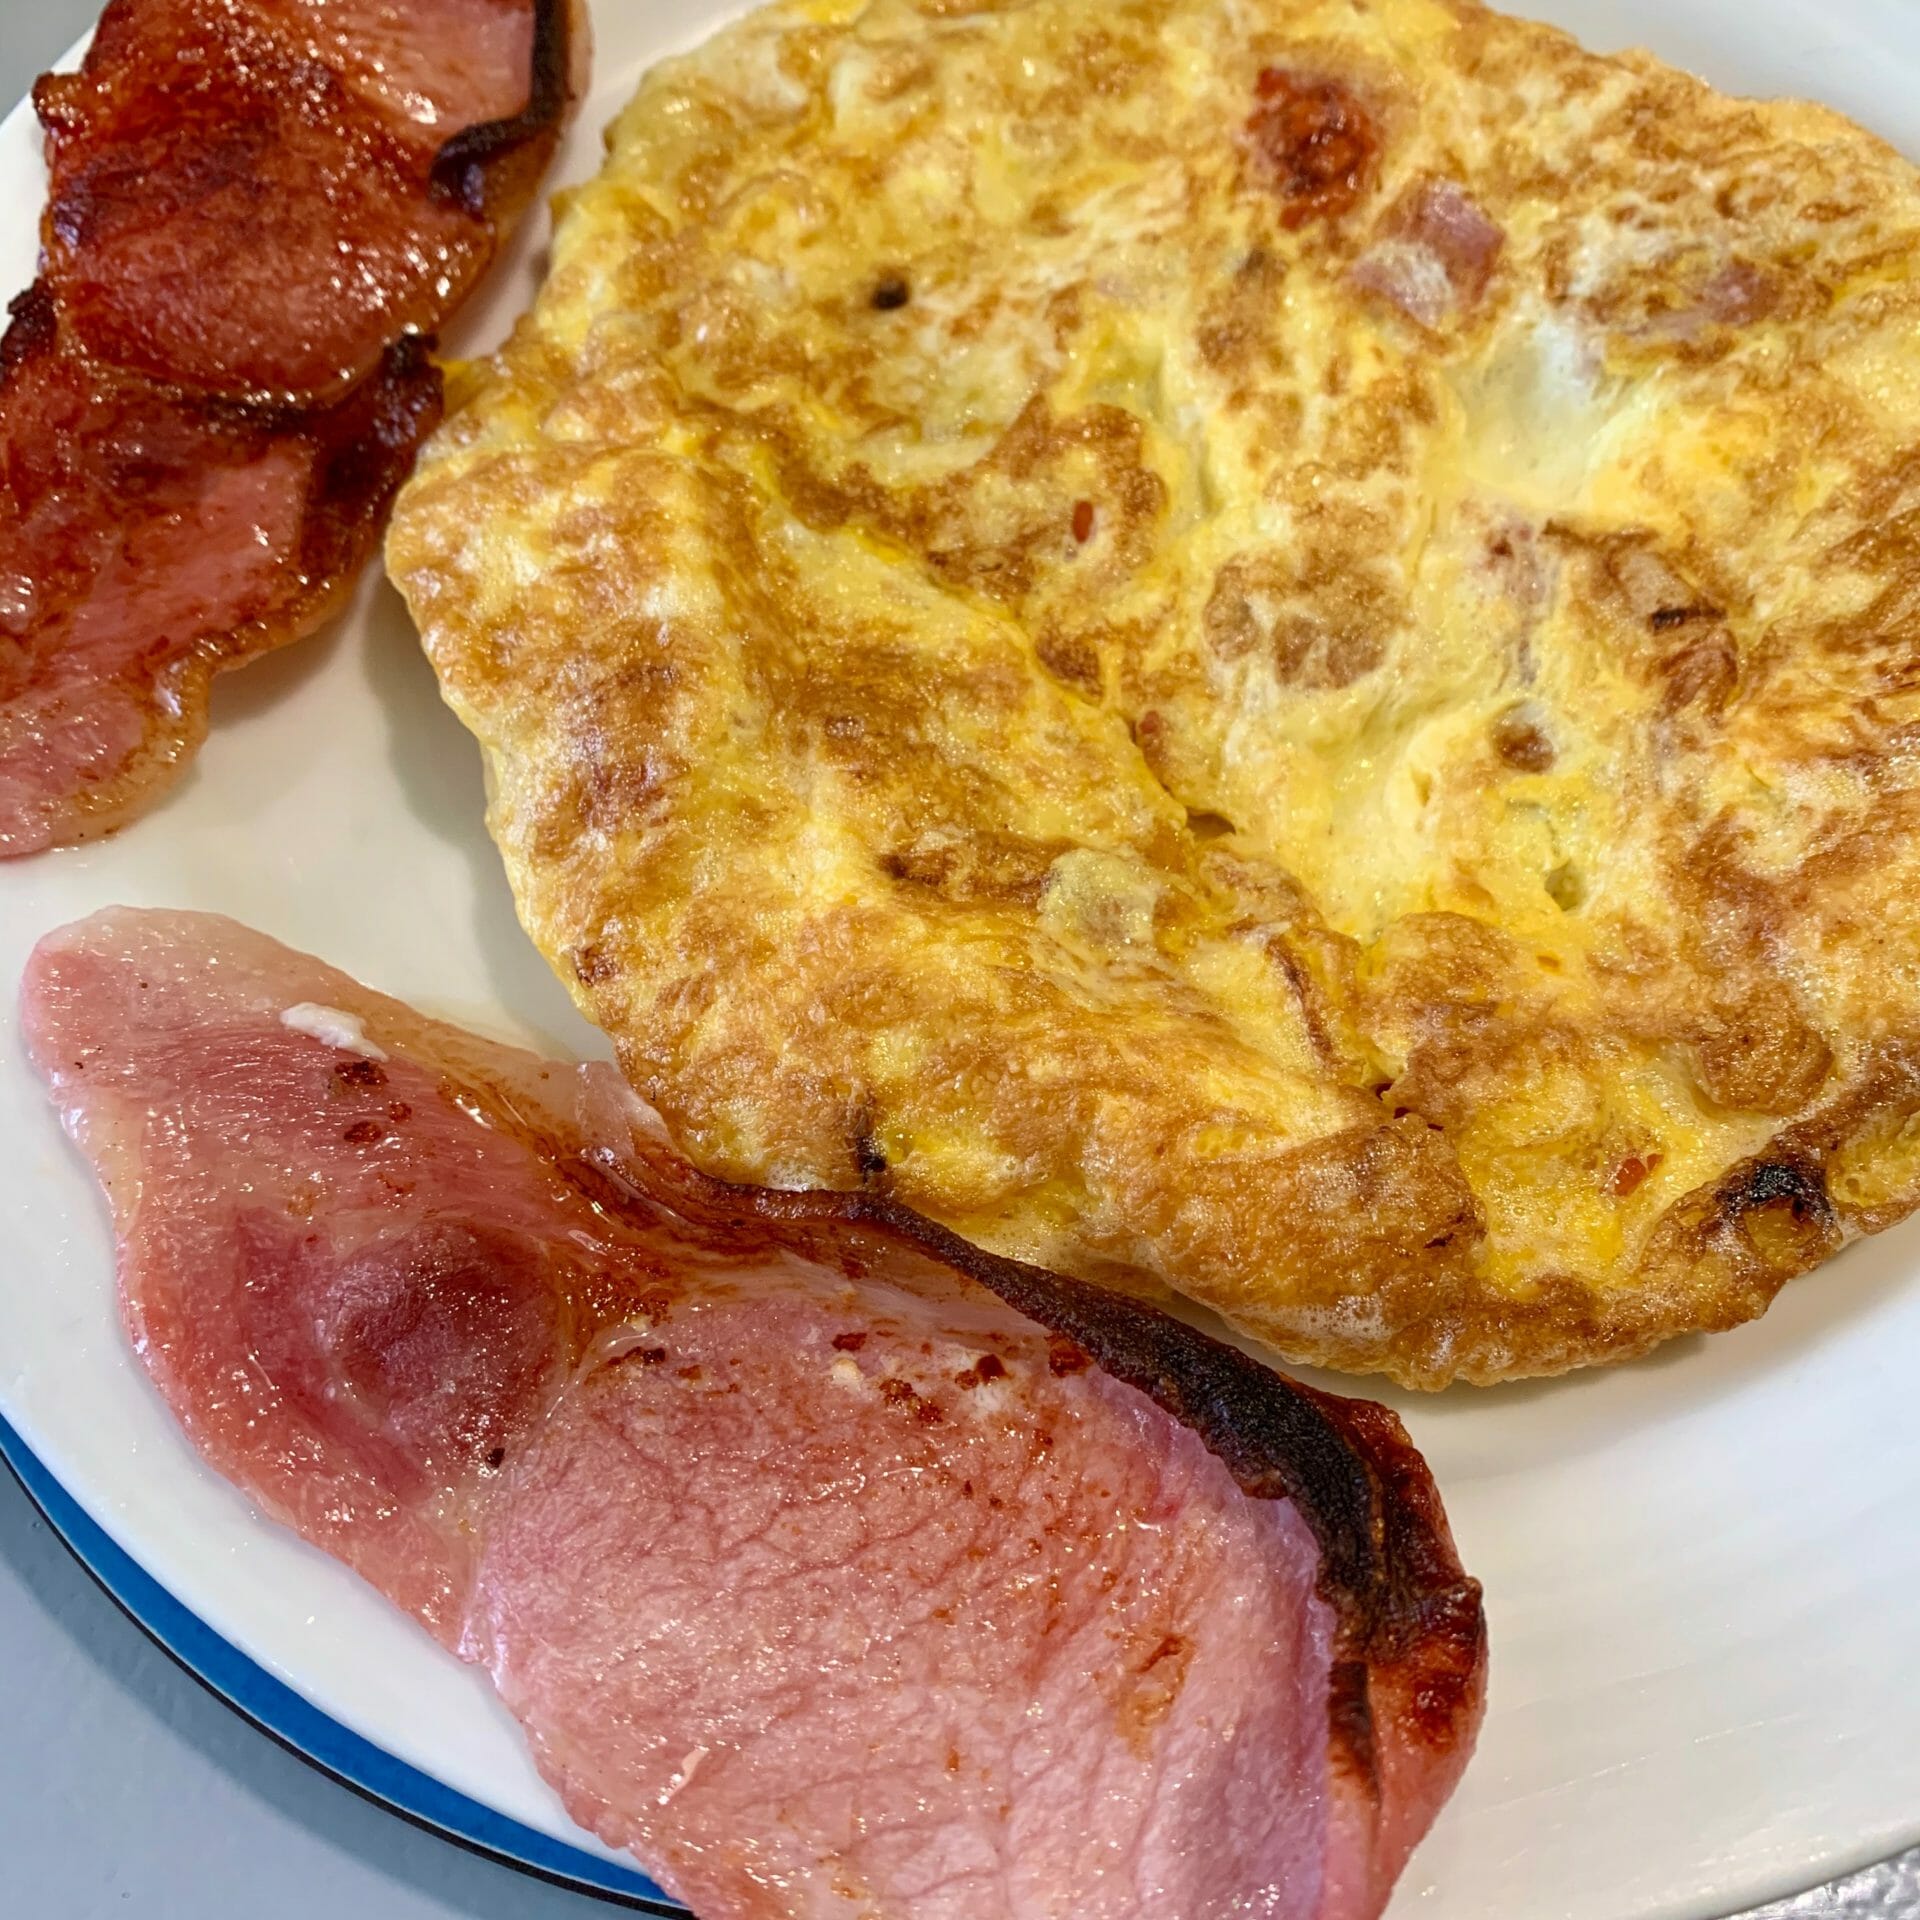 Egg omelette with Irish bacon